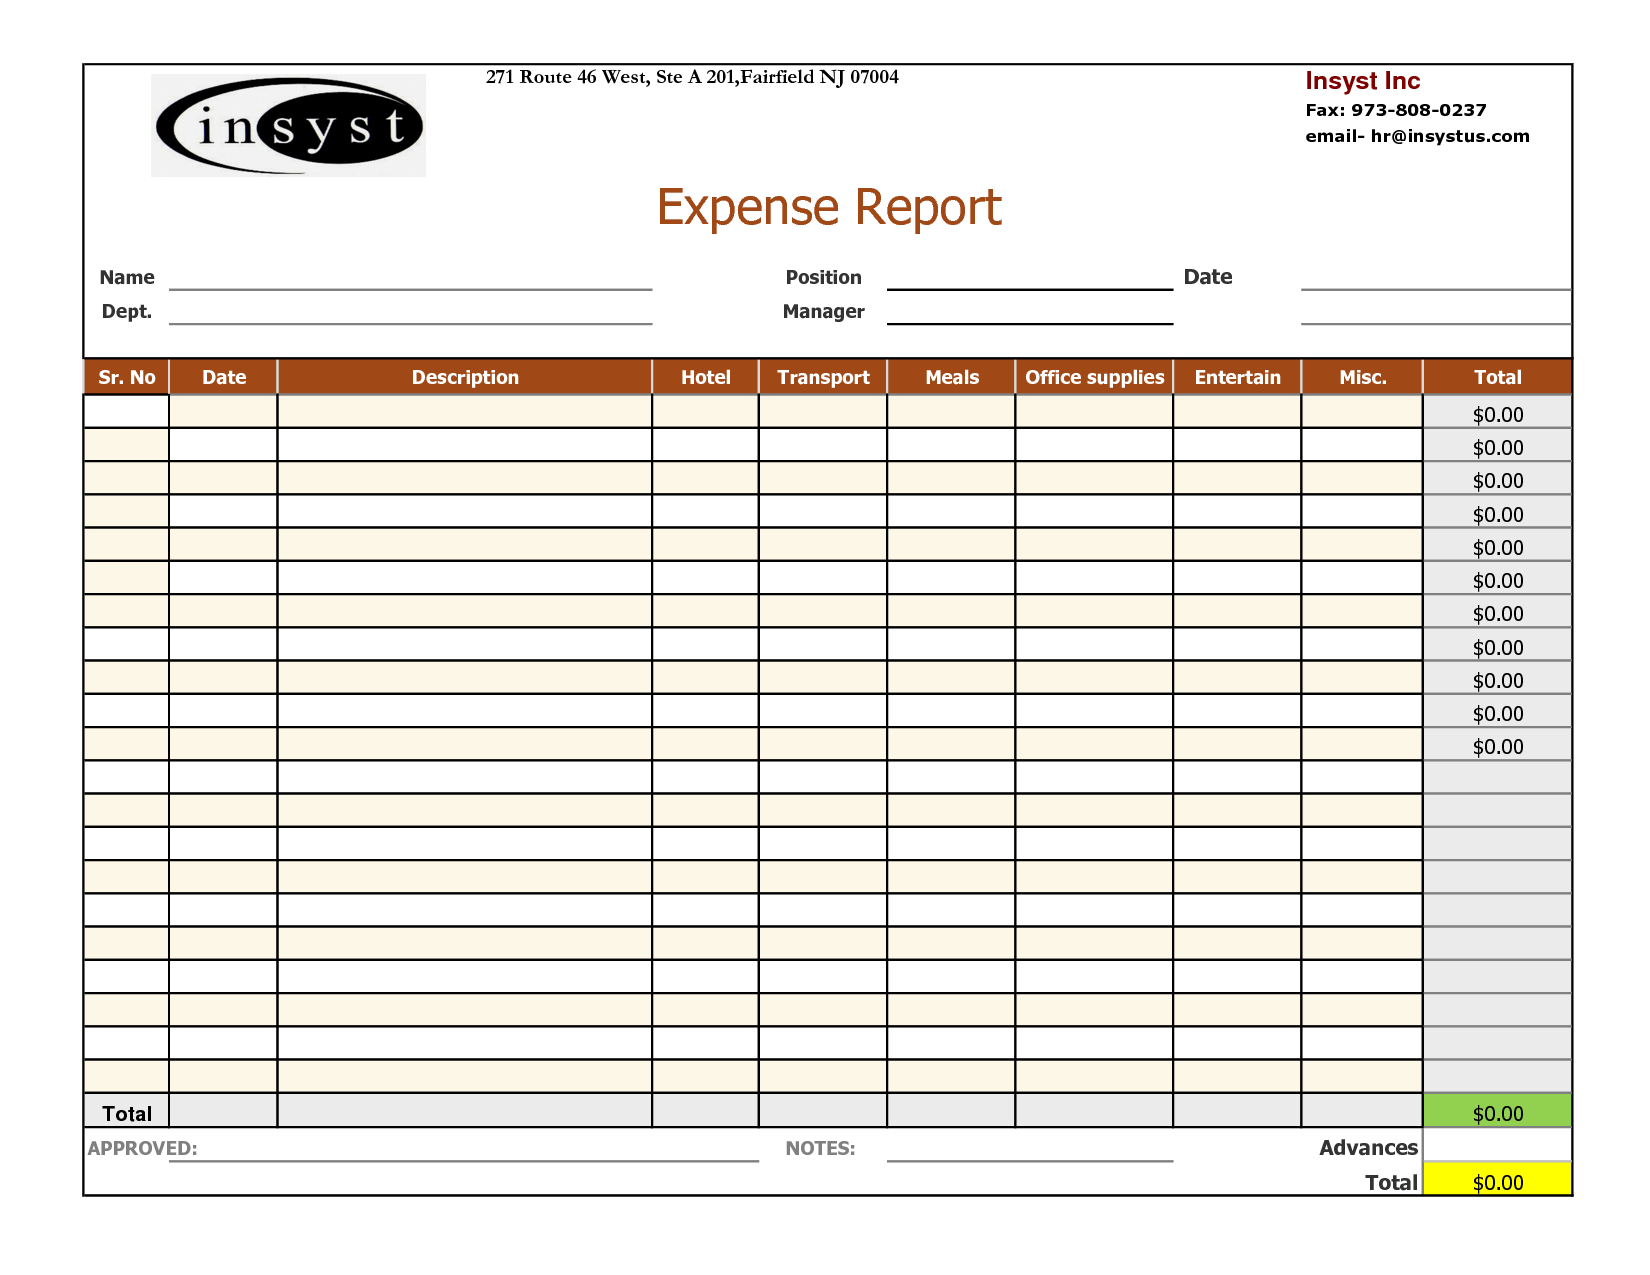 005 Expense Report And Tracking Template With Company Logo With Regard To Company Expense Report Template